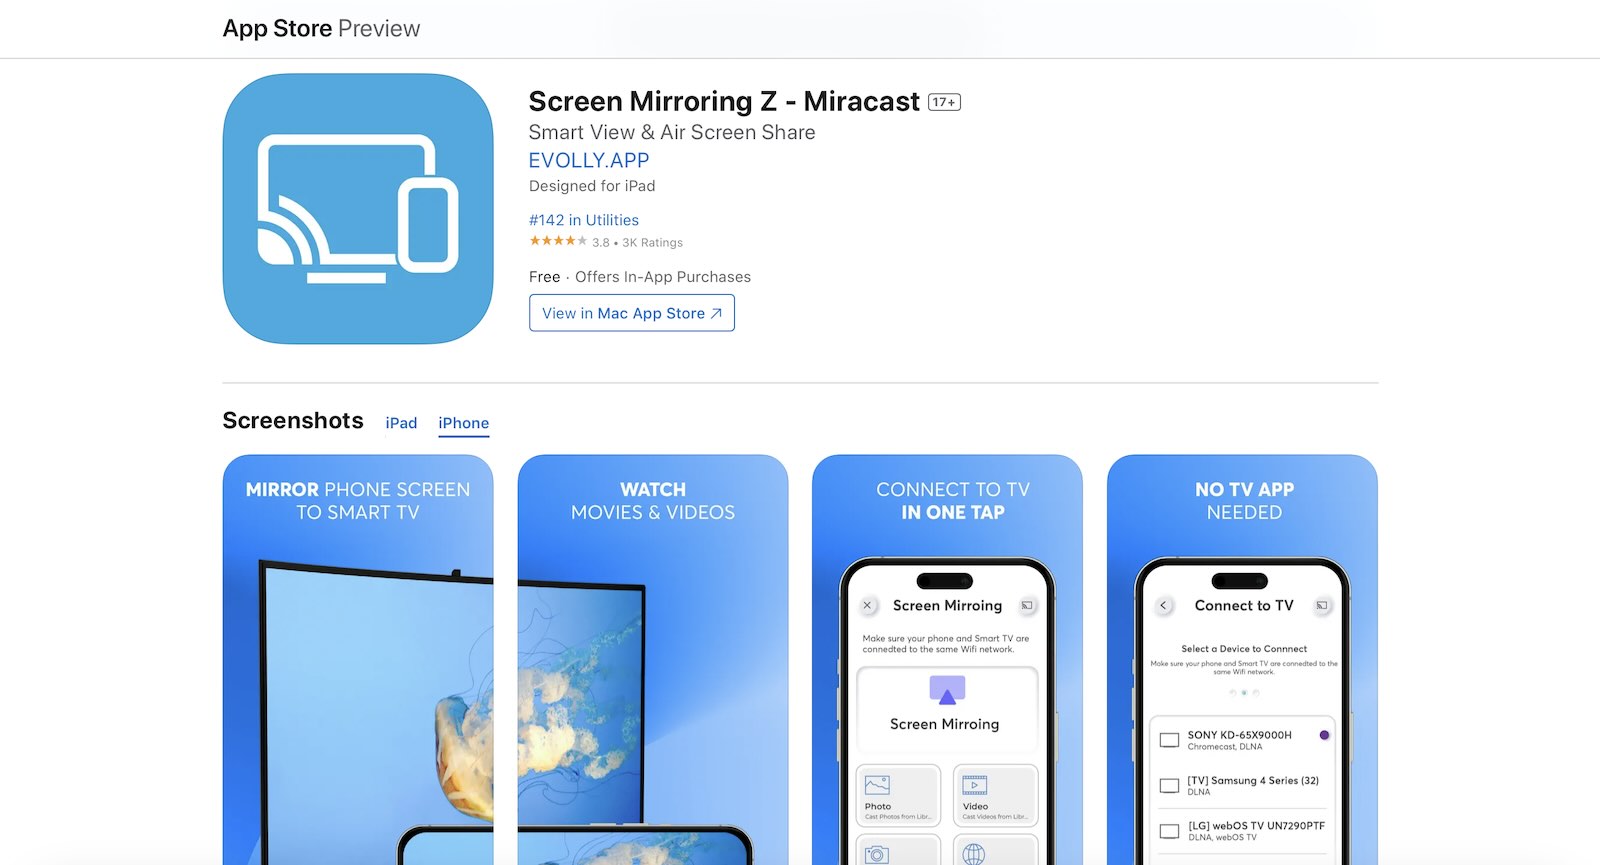 Screen Mirroring Z - Miracast in the App Store